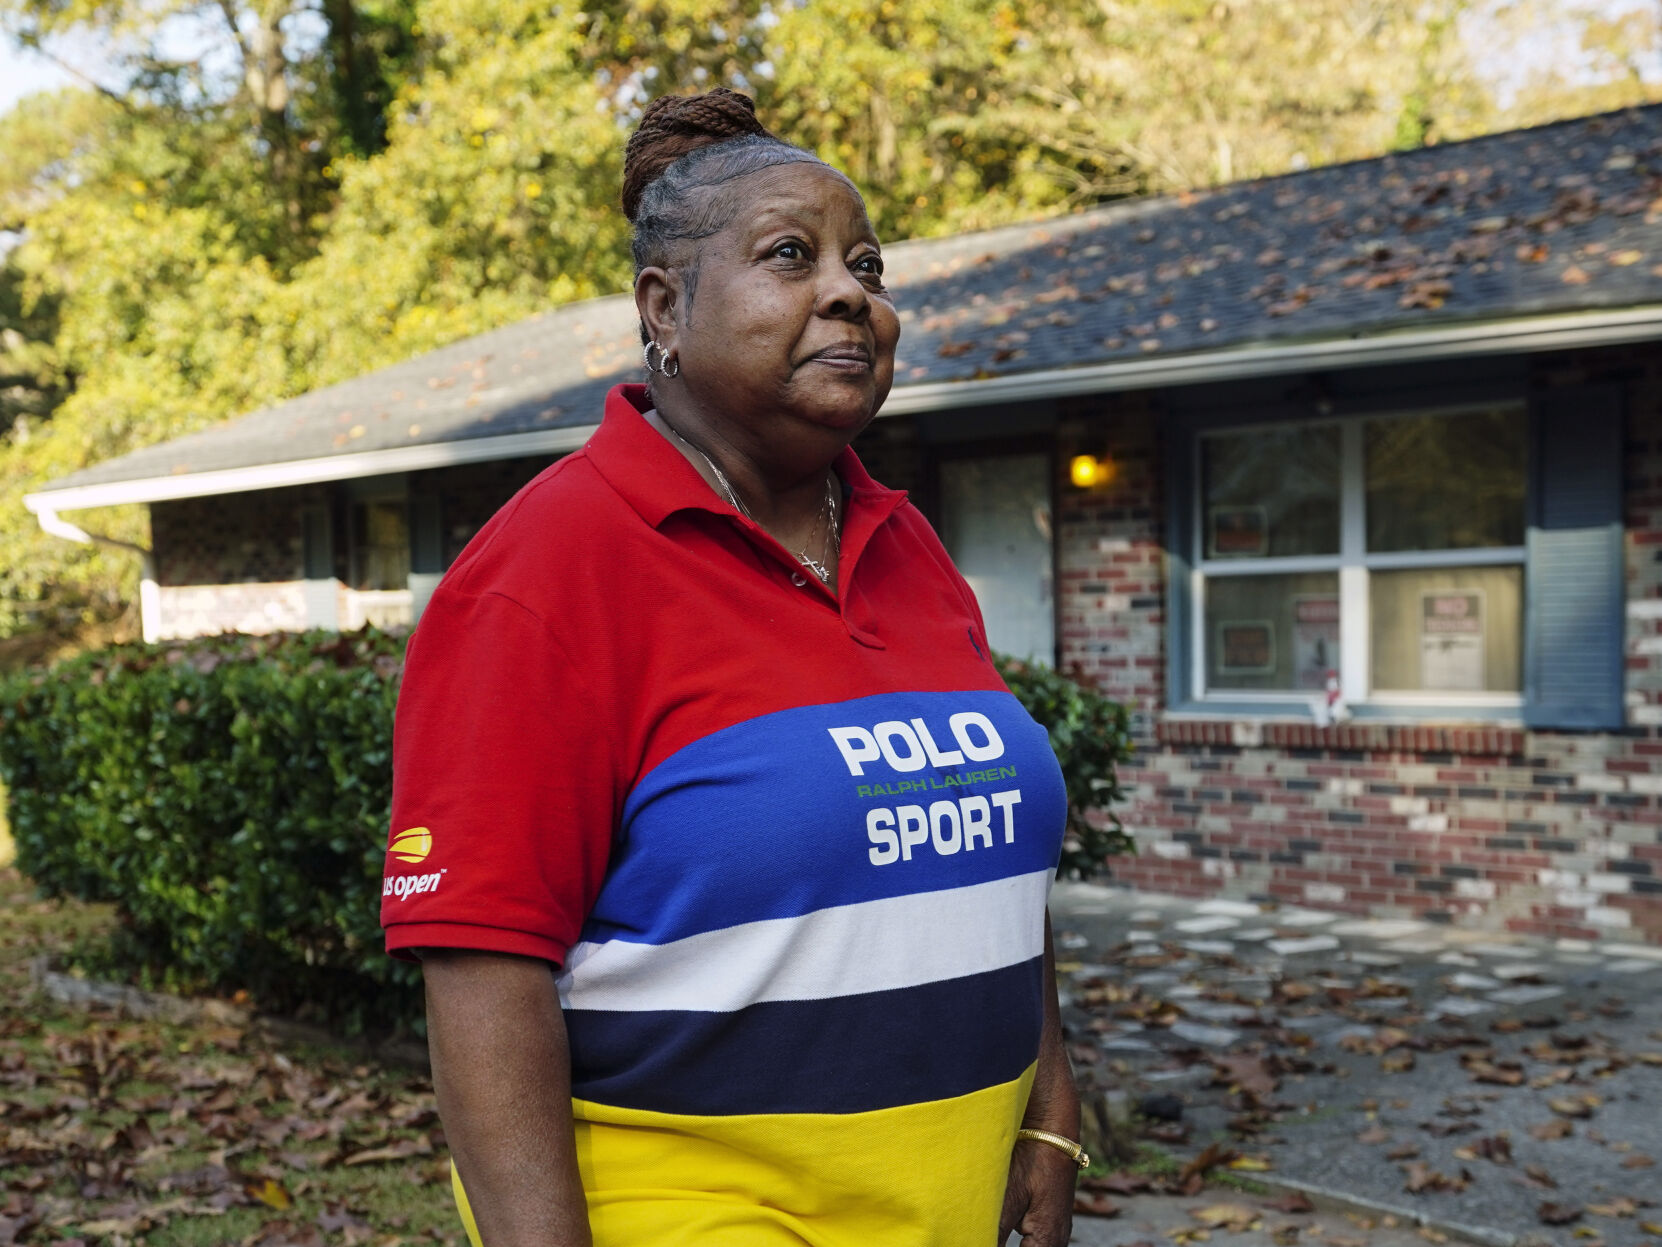 <p>Georgia voter Cynthia Jones speaks in front of her home where she and her disabled sister live, Thursday, Nov. 3, 2022, in Atlanta. The Atlanta native sees a country split between haves and have nots. (AP Photo/John Bazemore)</p>   PHOTO CREDIT: John Bazemore - staff, AP